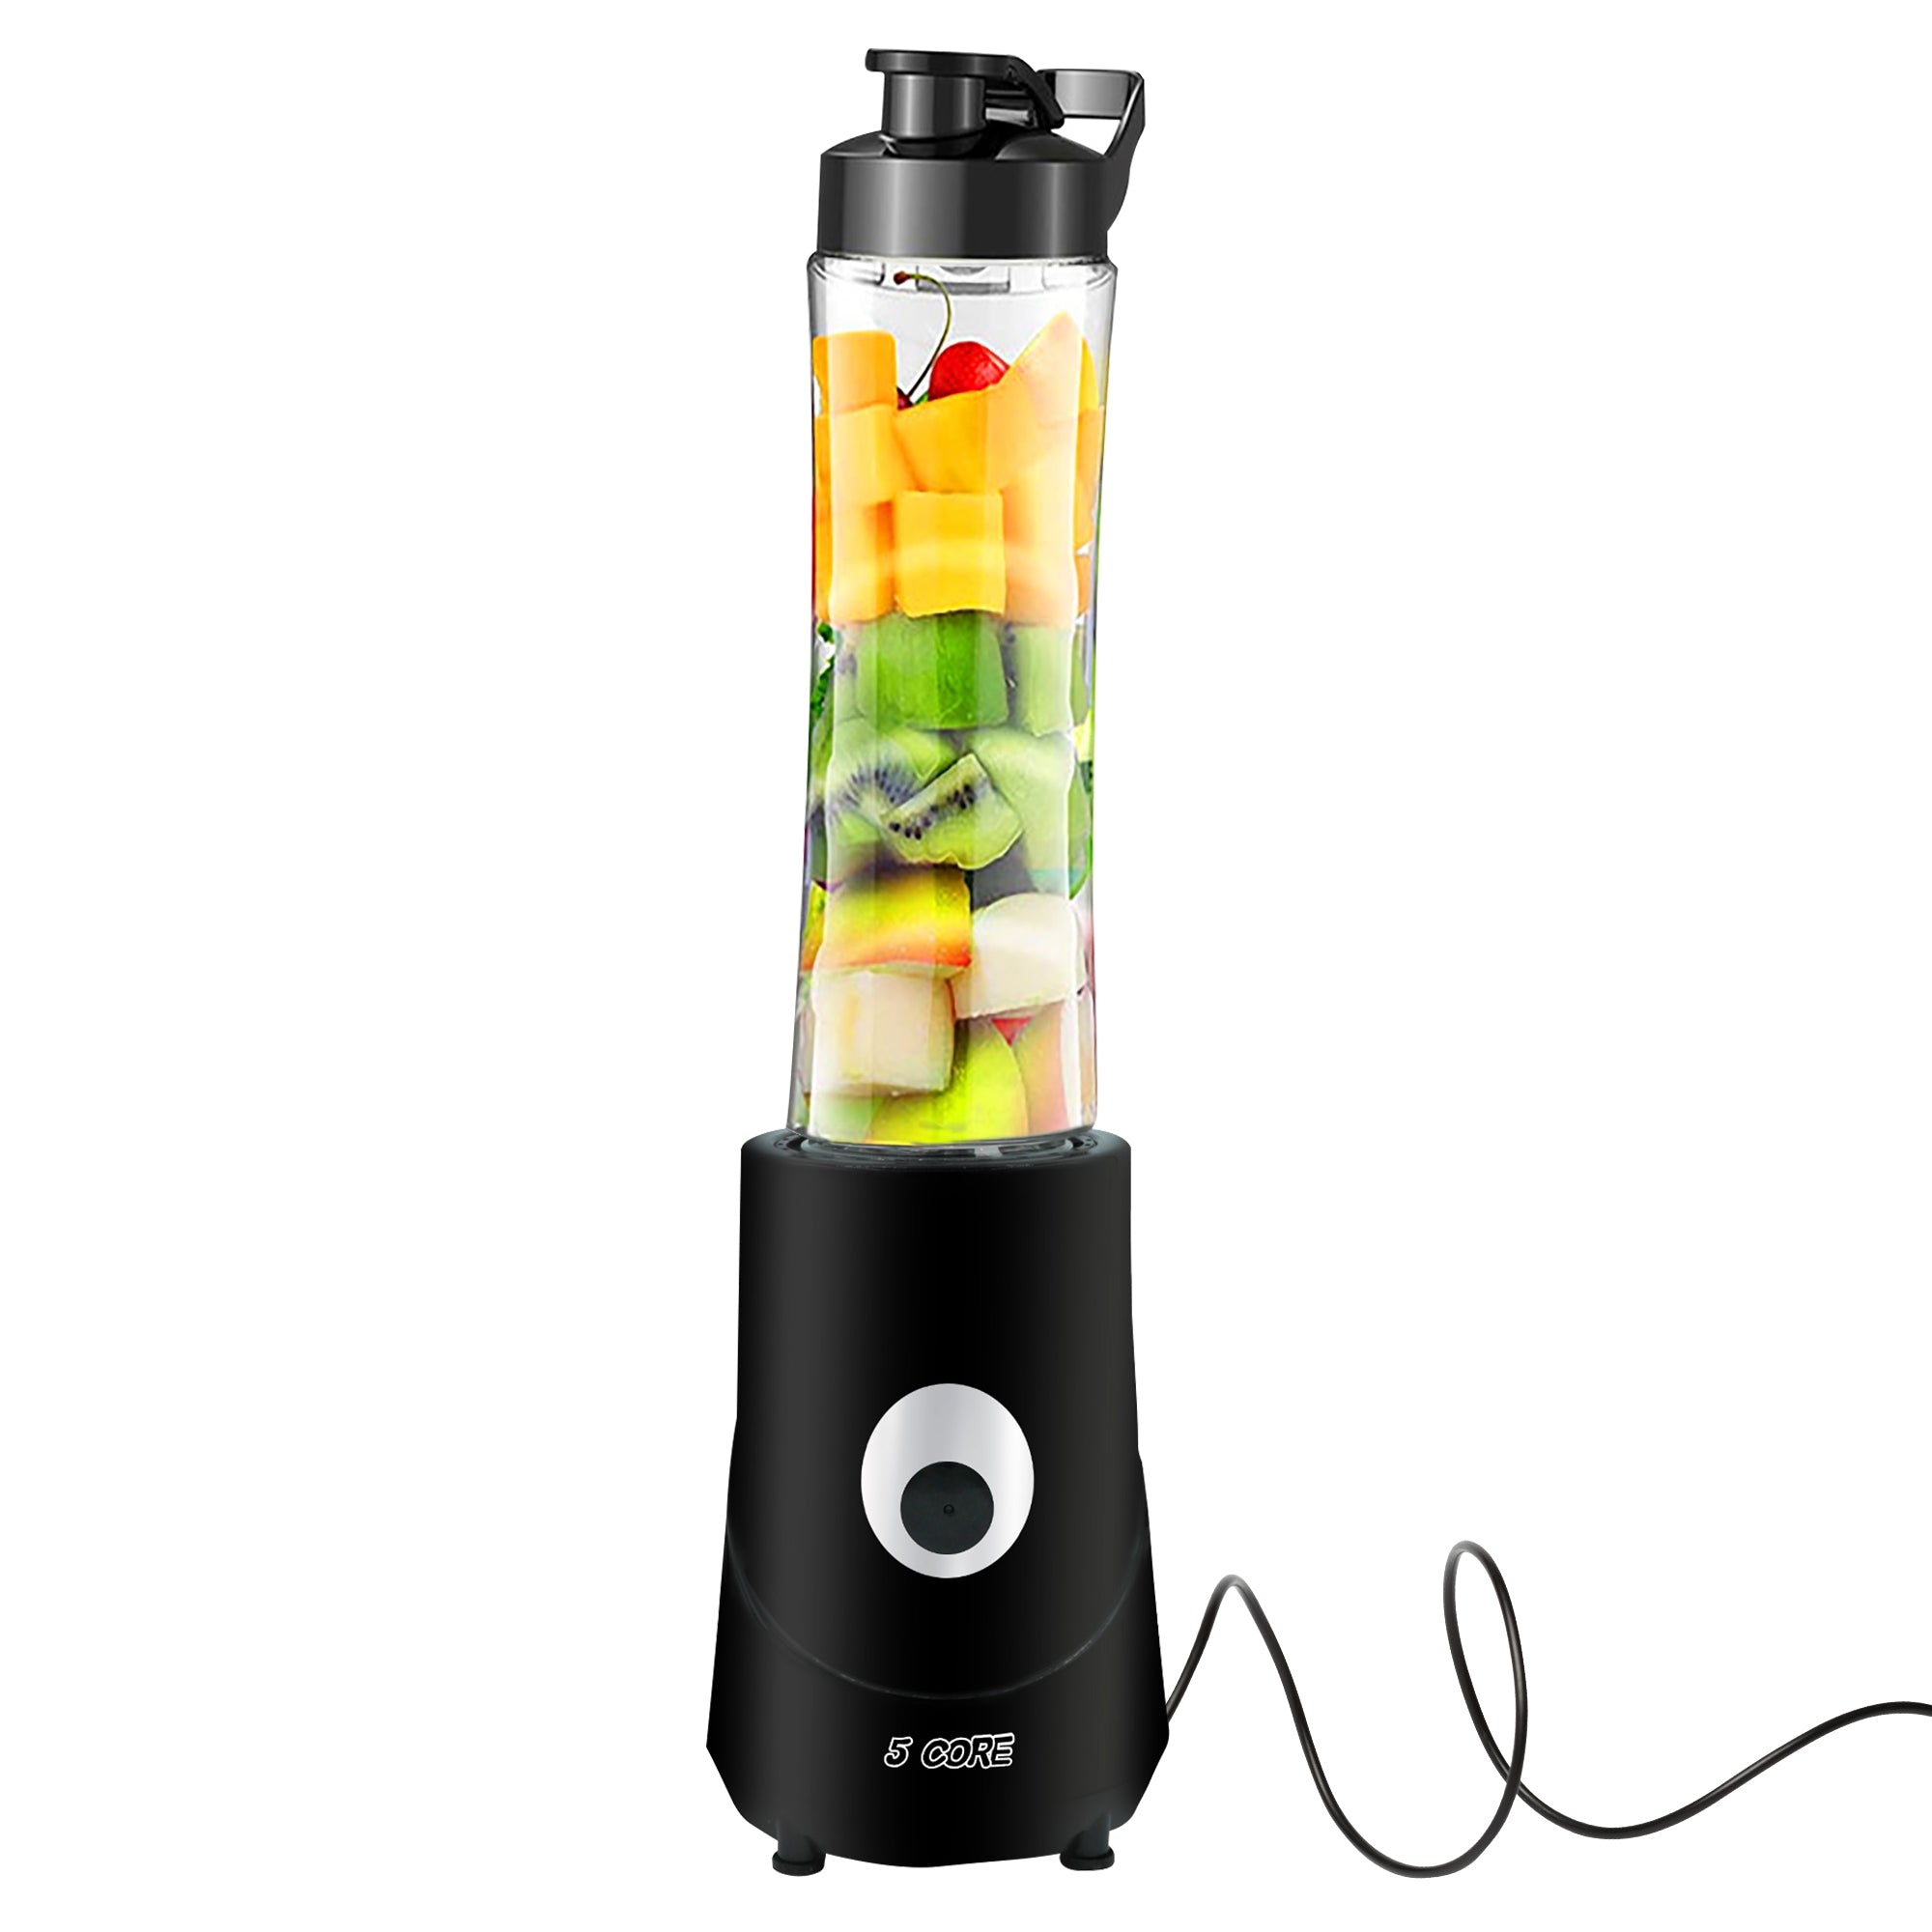 5 Core Portable Blenders For Kitchen 20 Oz Capacity 160W Personal Blender Small Smoothie Maker